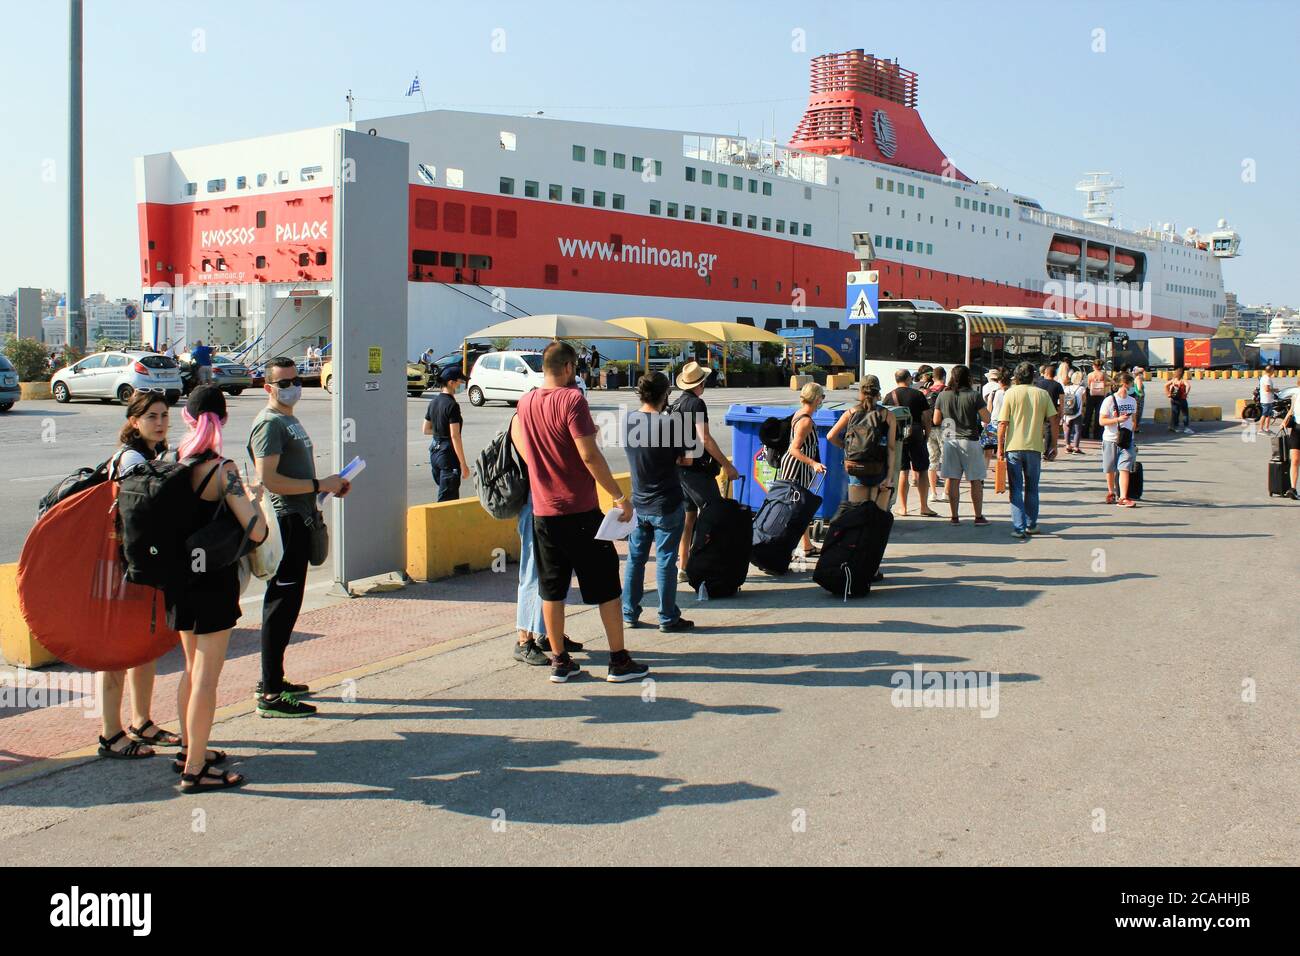 Greece, Piraeus, August 1 2020 - Passengers waiting for buying tickets and embark on a ferry boat with Greek islands as destination. Stock Photo